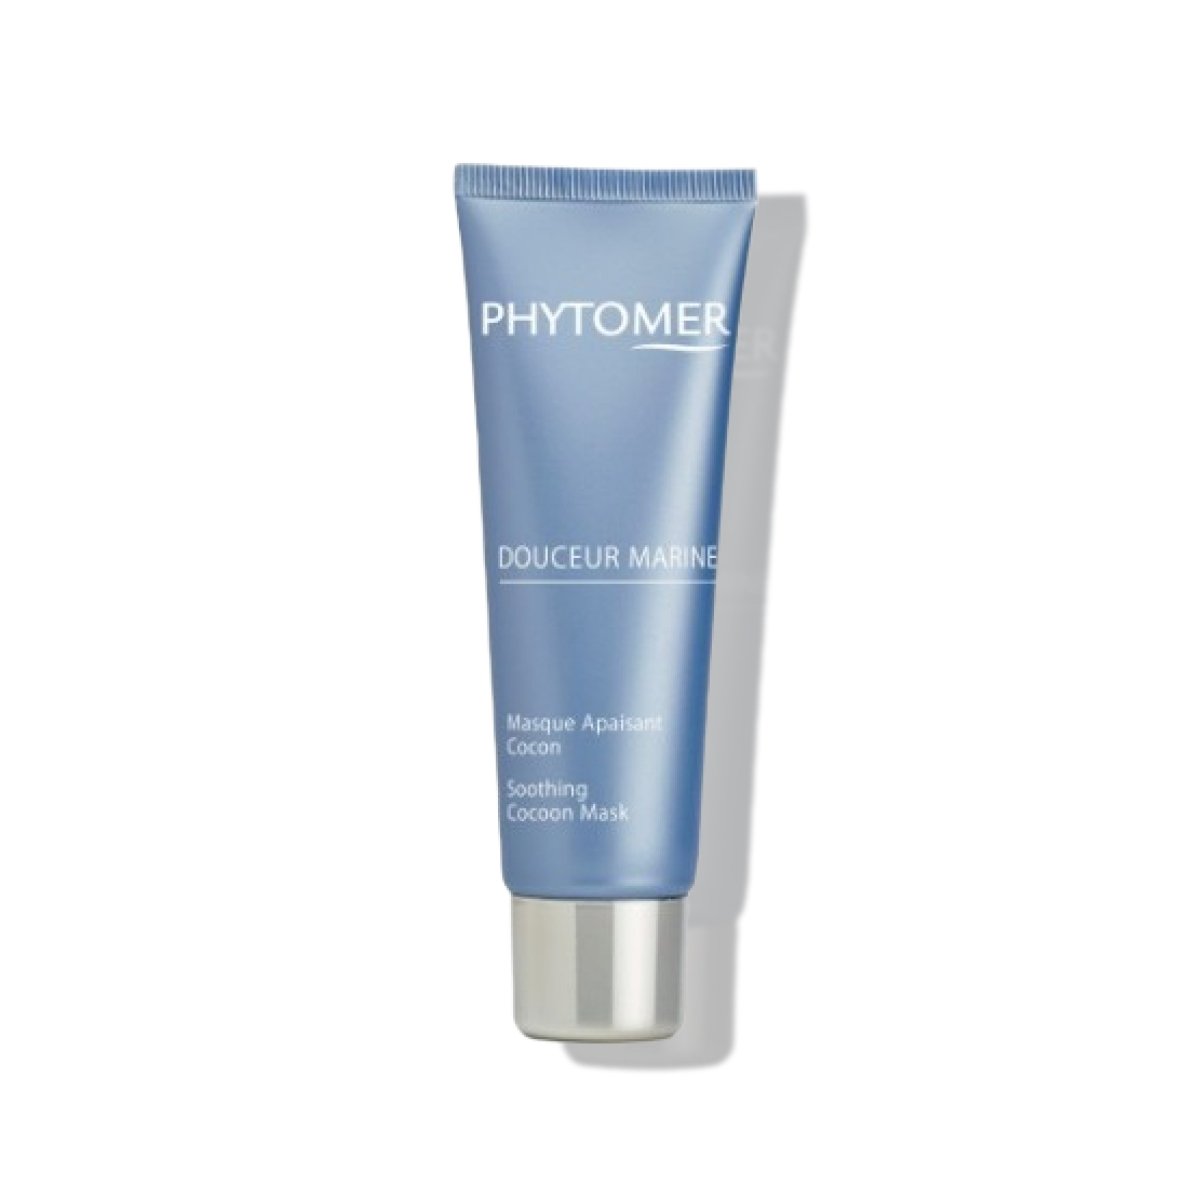 Phytomer Douceur Marine Soothing Cocoon Mask - SkincareEssentials